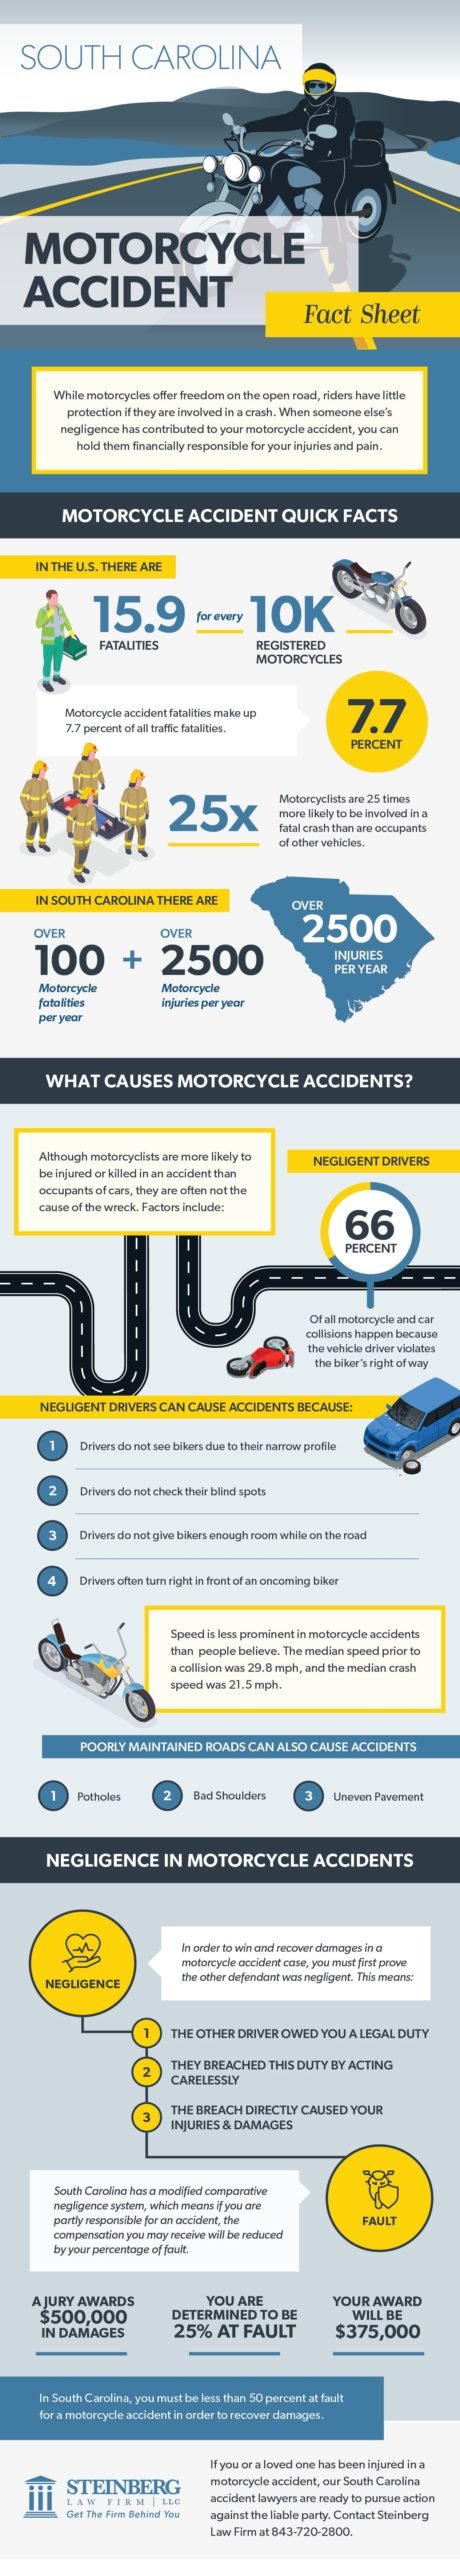 South Carolina motorcycle accident attorney